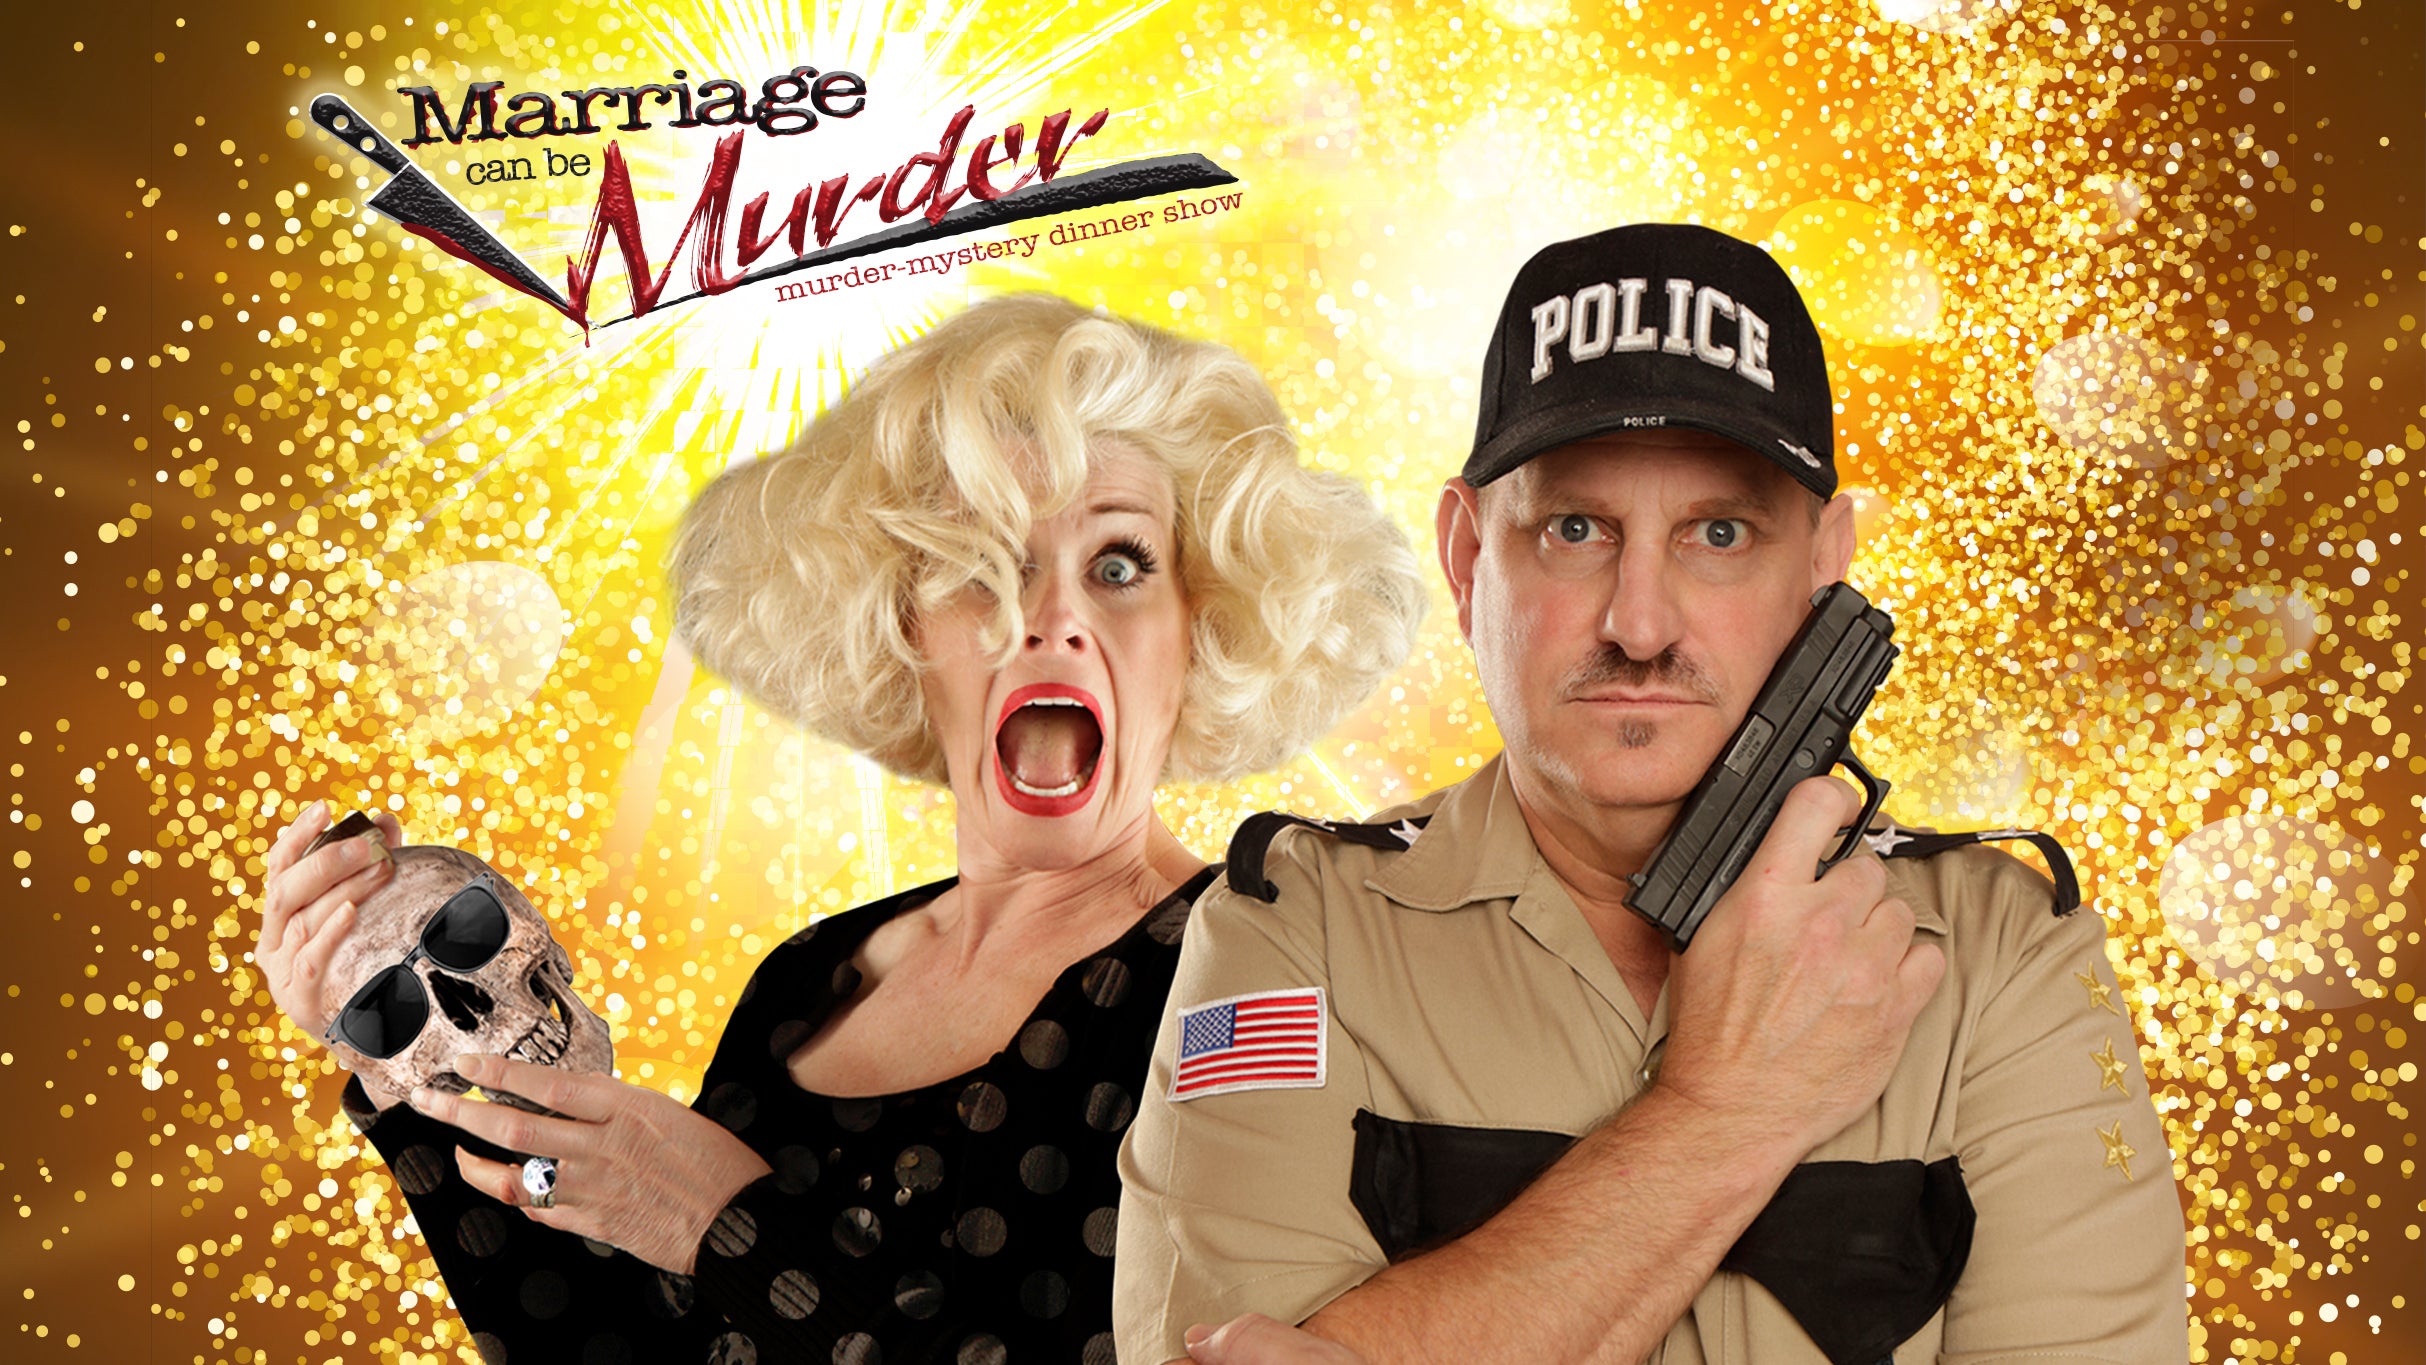 Marriage can be Murder at The Orleans Hotel and Casino